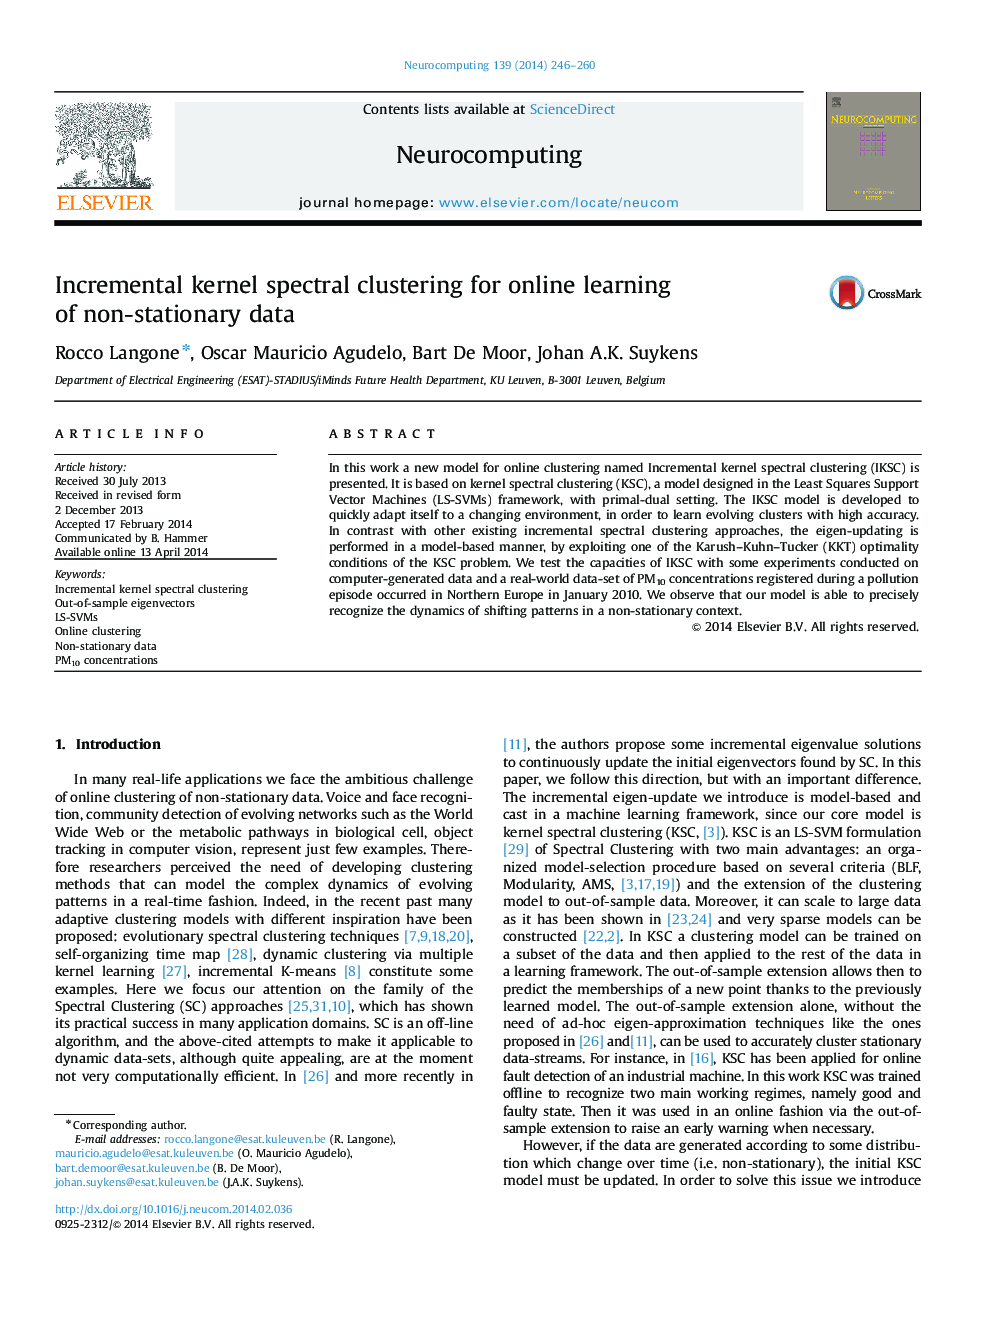 Incremental kernel spectral clustering for online learning of non-stationary data